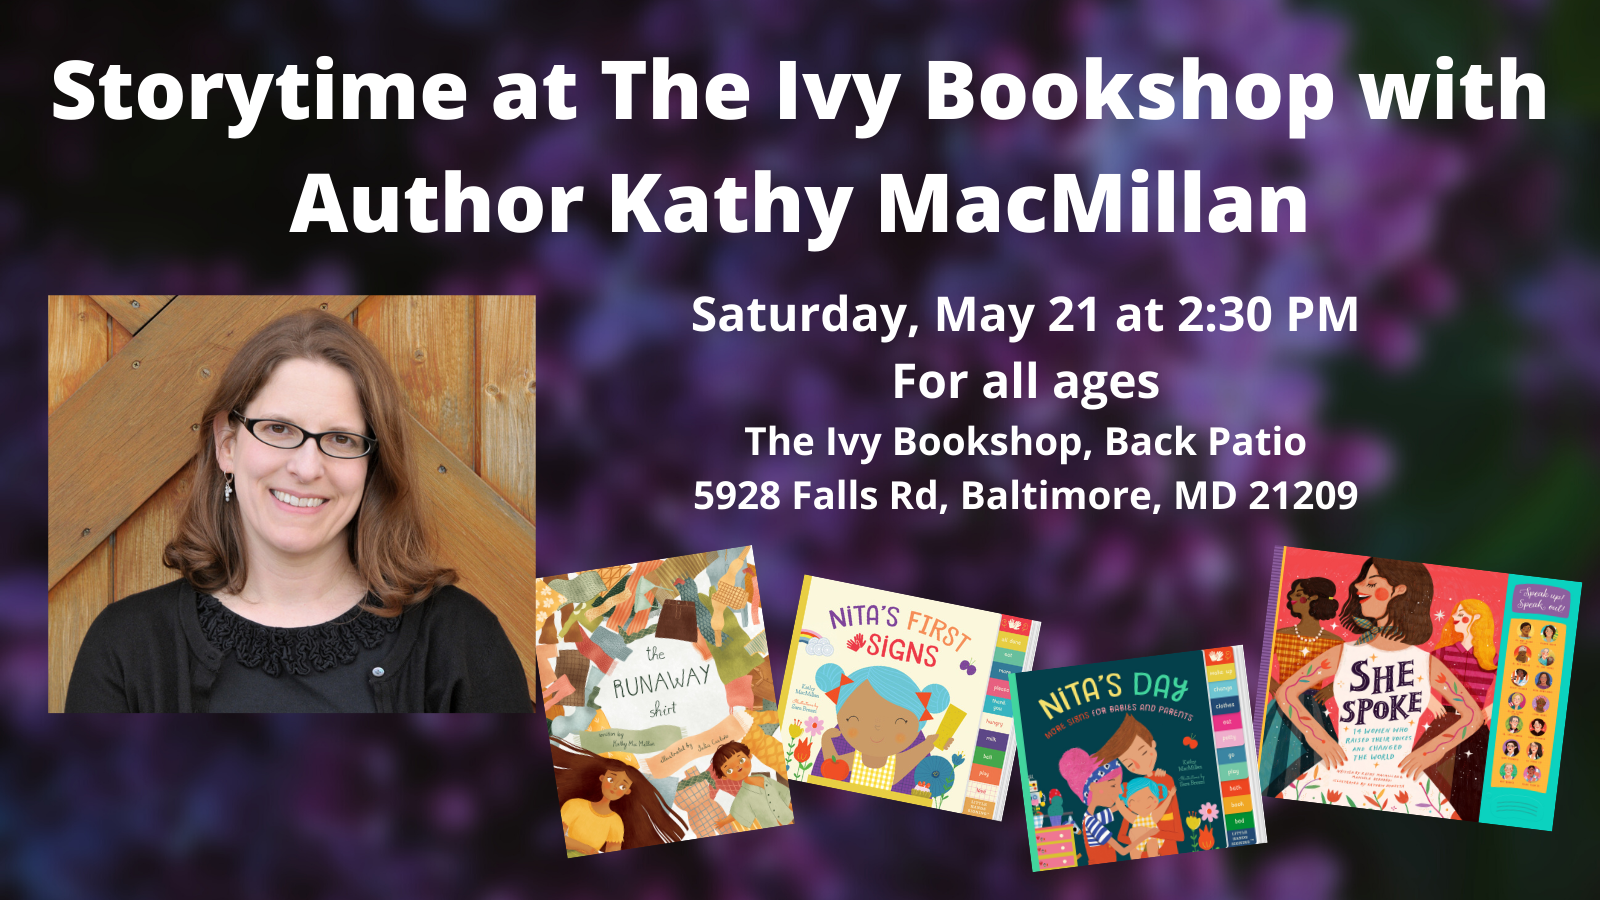 A photo of a smiling white woman with glasses appears next to the covers of picture book THE RUNAWAY SHIRT and board books NITA'S FIRST SIGNS and NITA'S DAY and nonfiction book SHE SPOKE. Text appears in white against a photo of purple flowers: Storytime at The Ivy Bookshop with Author Kathy MacMillan. Saturday, May 21 at 2:30 PM. For all ages. The Ivy Bookshop, Back Patio. 5928 Falls Rd, Baltimore, MD 21209.